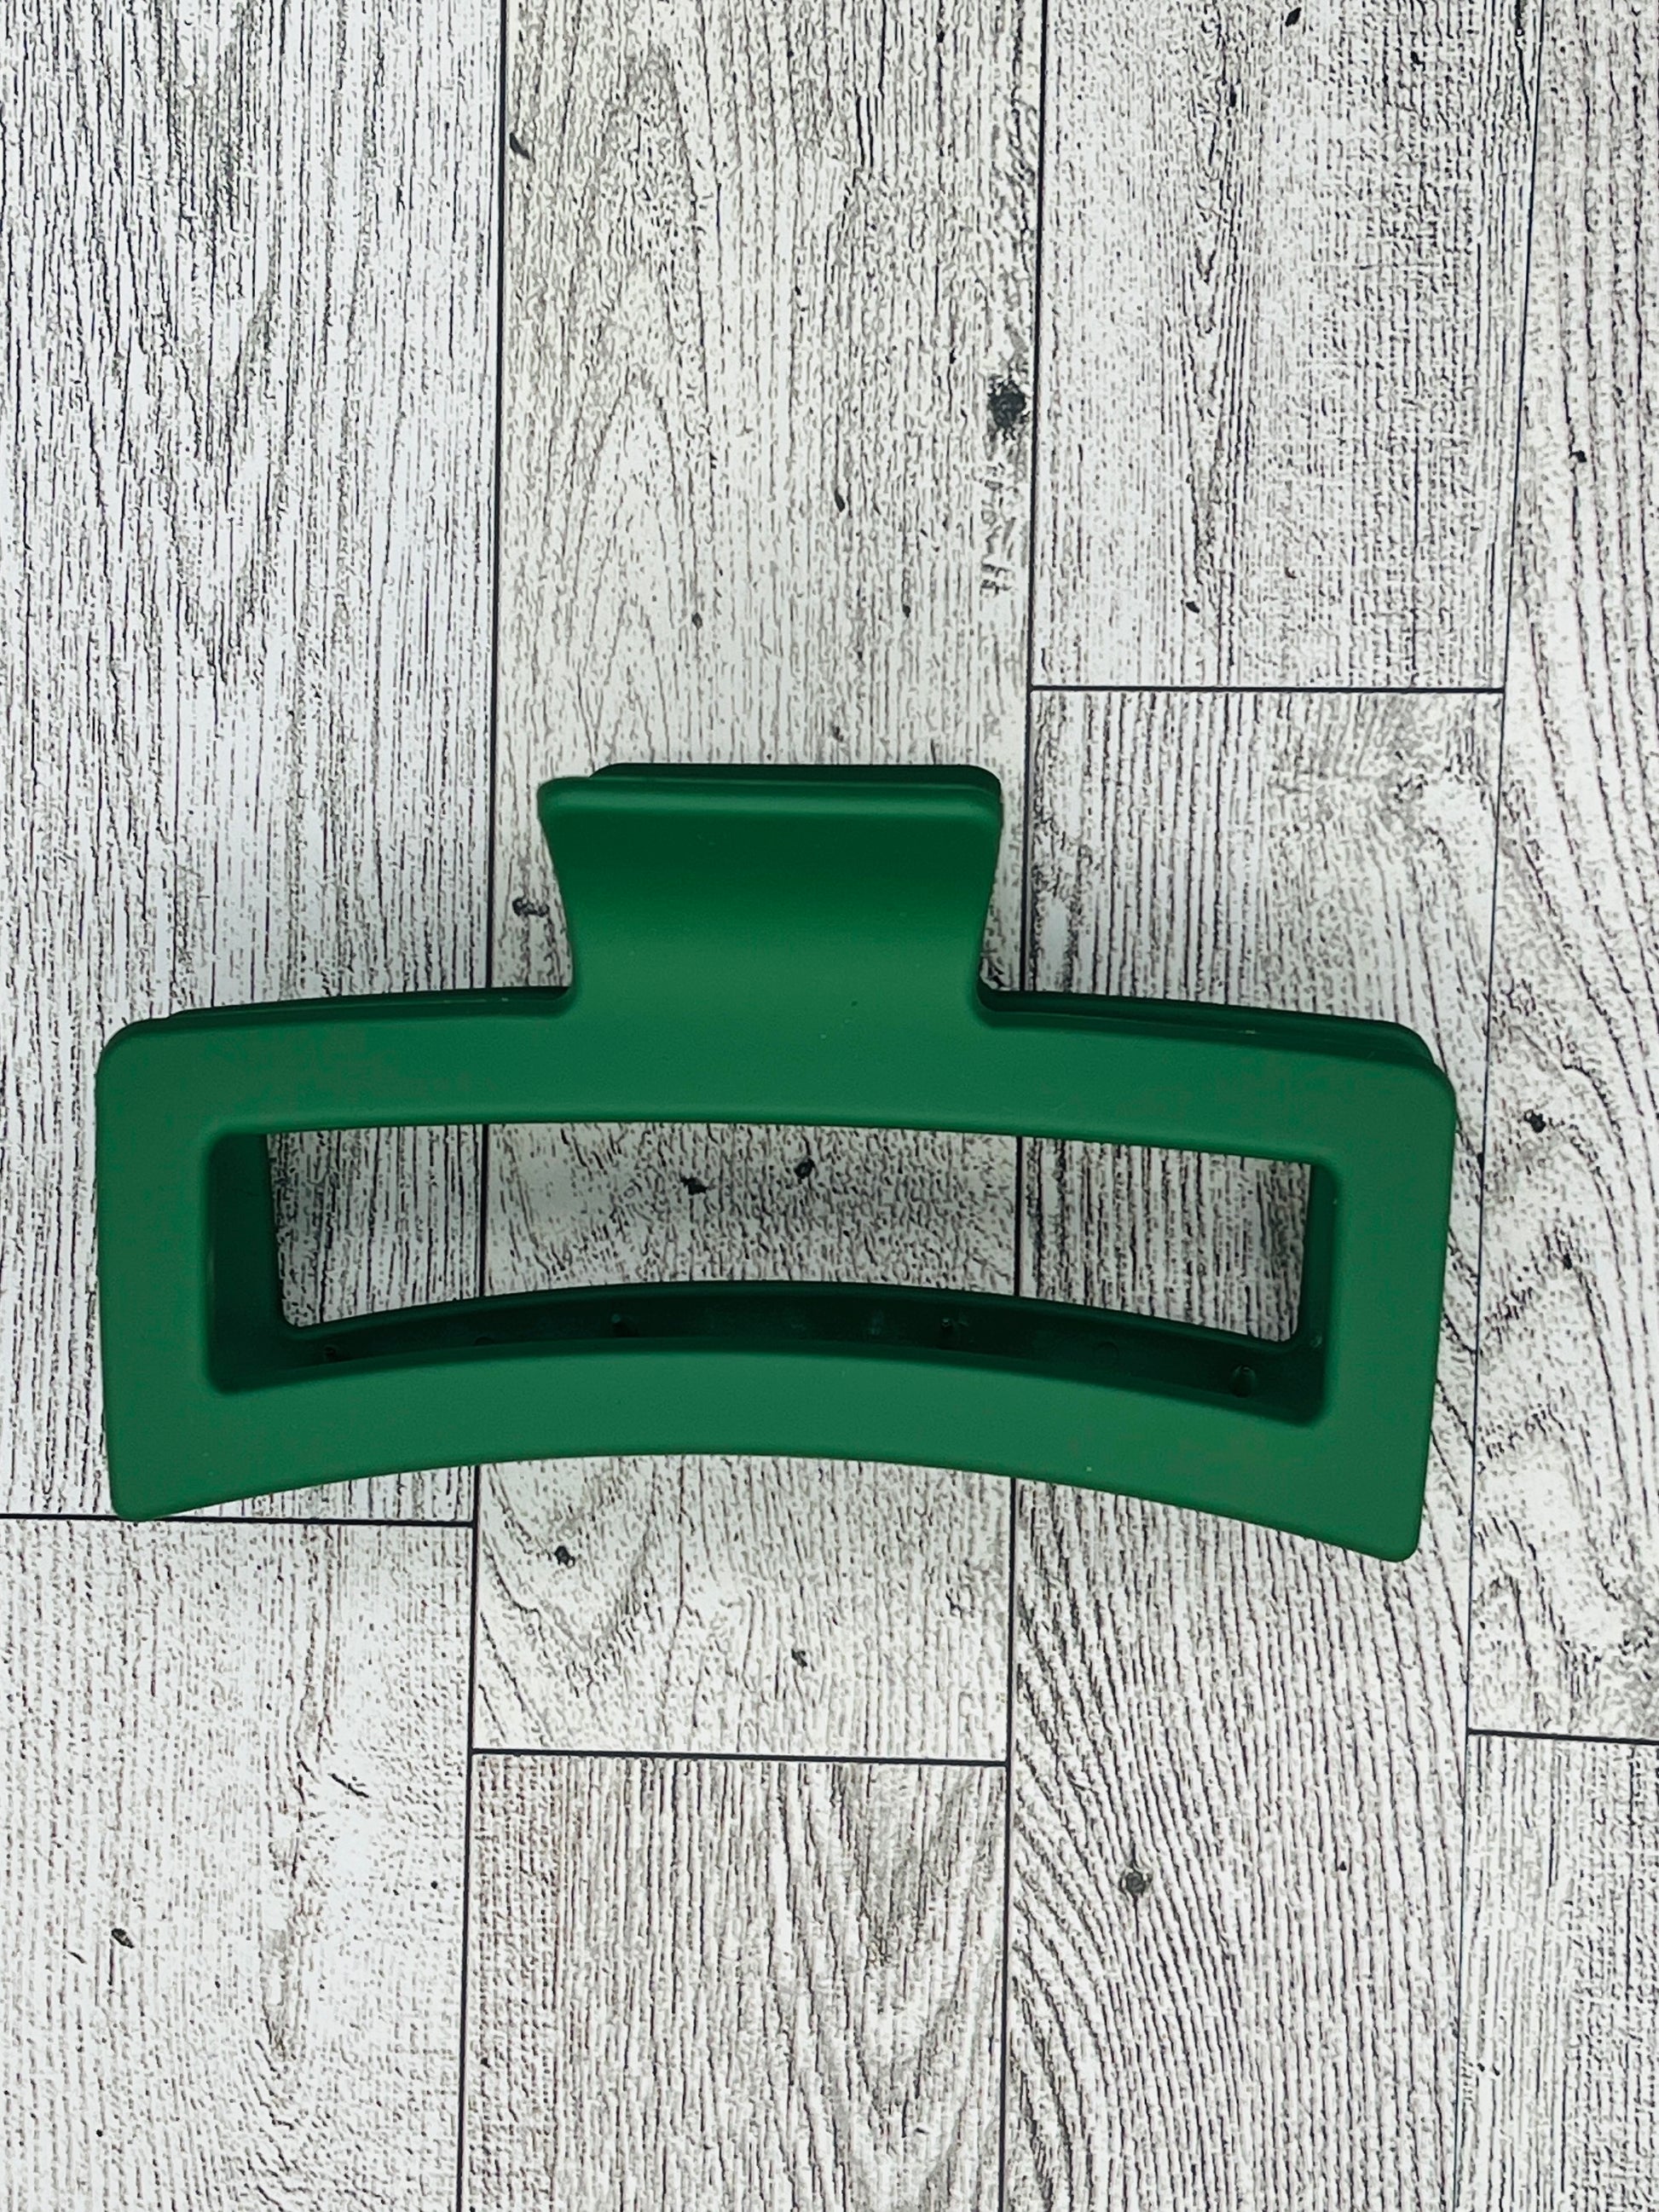 Matte Dark Green Hair Claw Clip - Rectangular shape - 4. 5 inches in length. Great for Braids, twists, long hair, thick hair, and coarse hair.